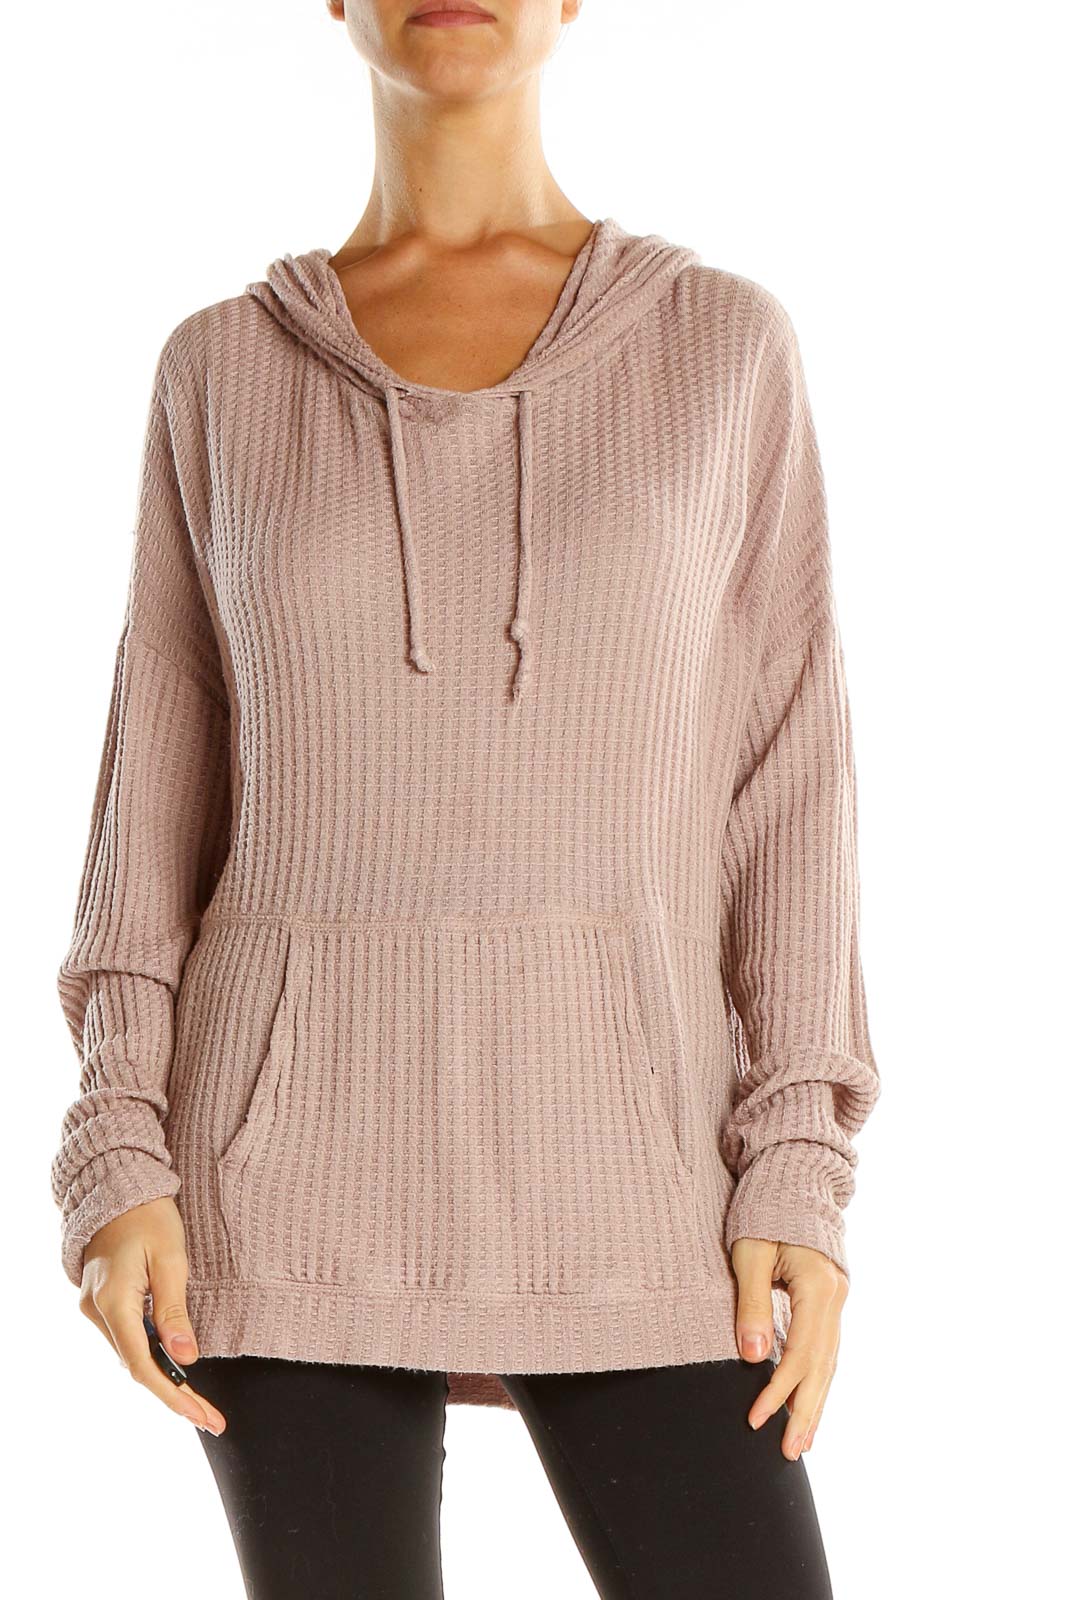 Pink Textured All Day Wear Sweater Front